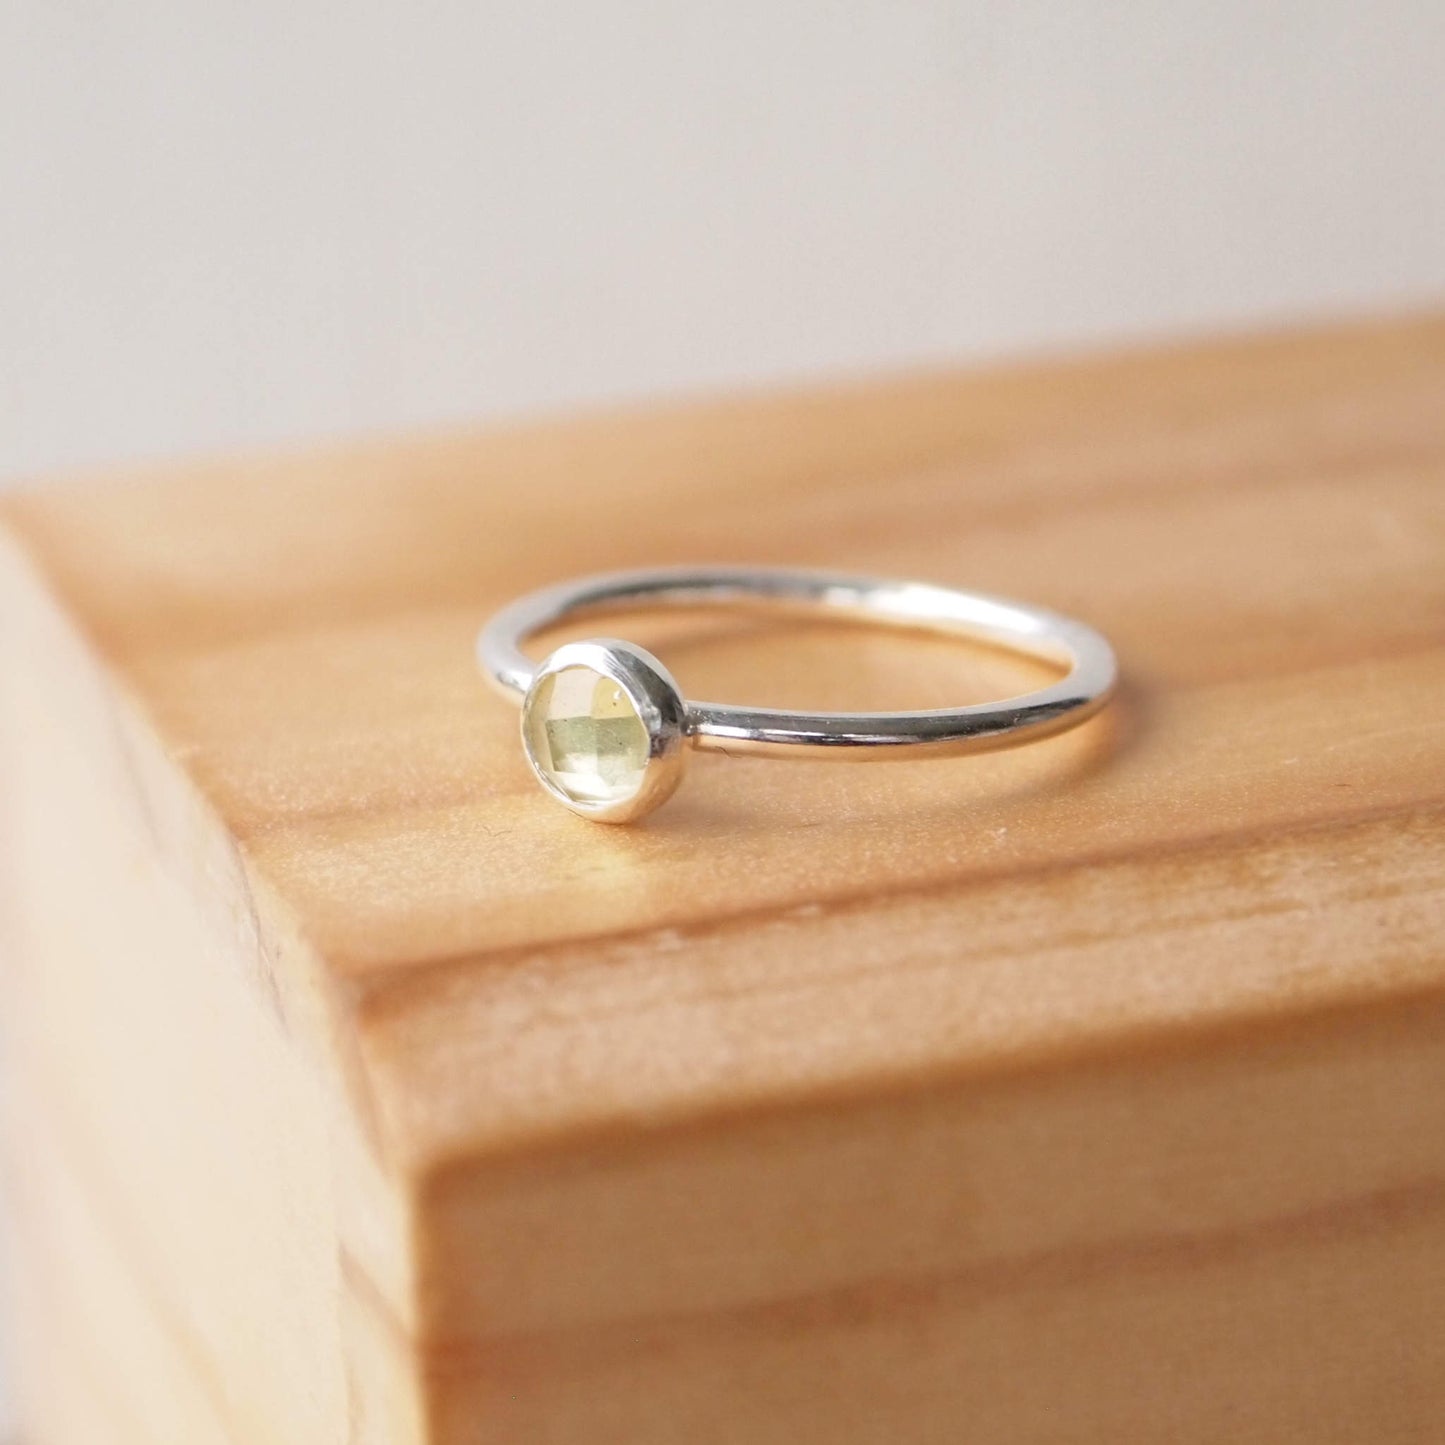 Yellow Quartz Sterling Silver Gemstone ring with a round 5mm facet cut pale lemon yellow cabochon. Handmade in Scotland by maram jewellery